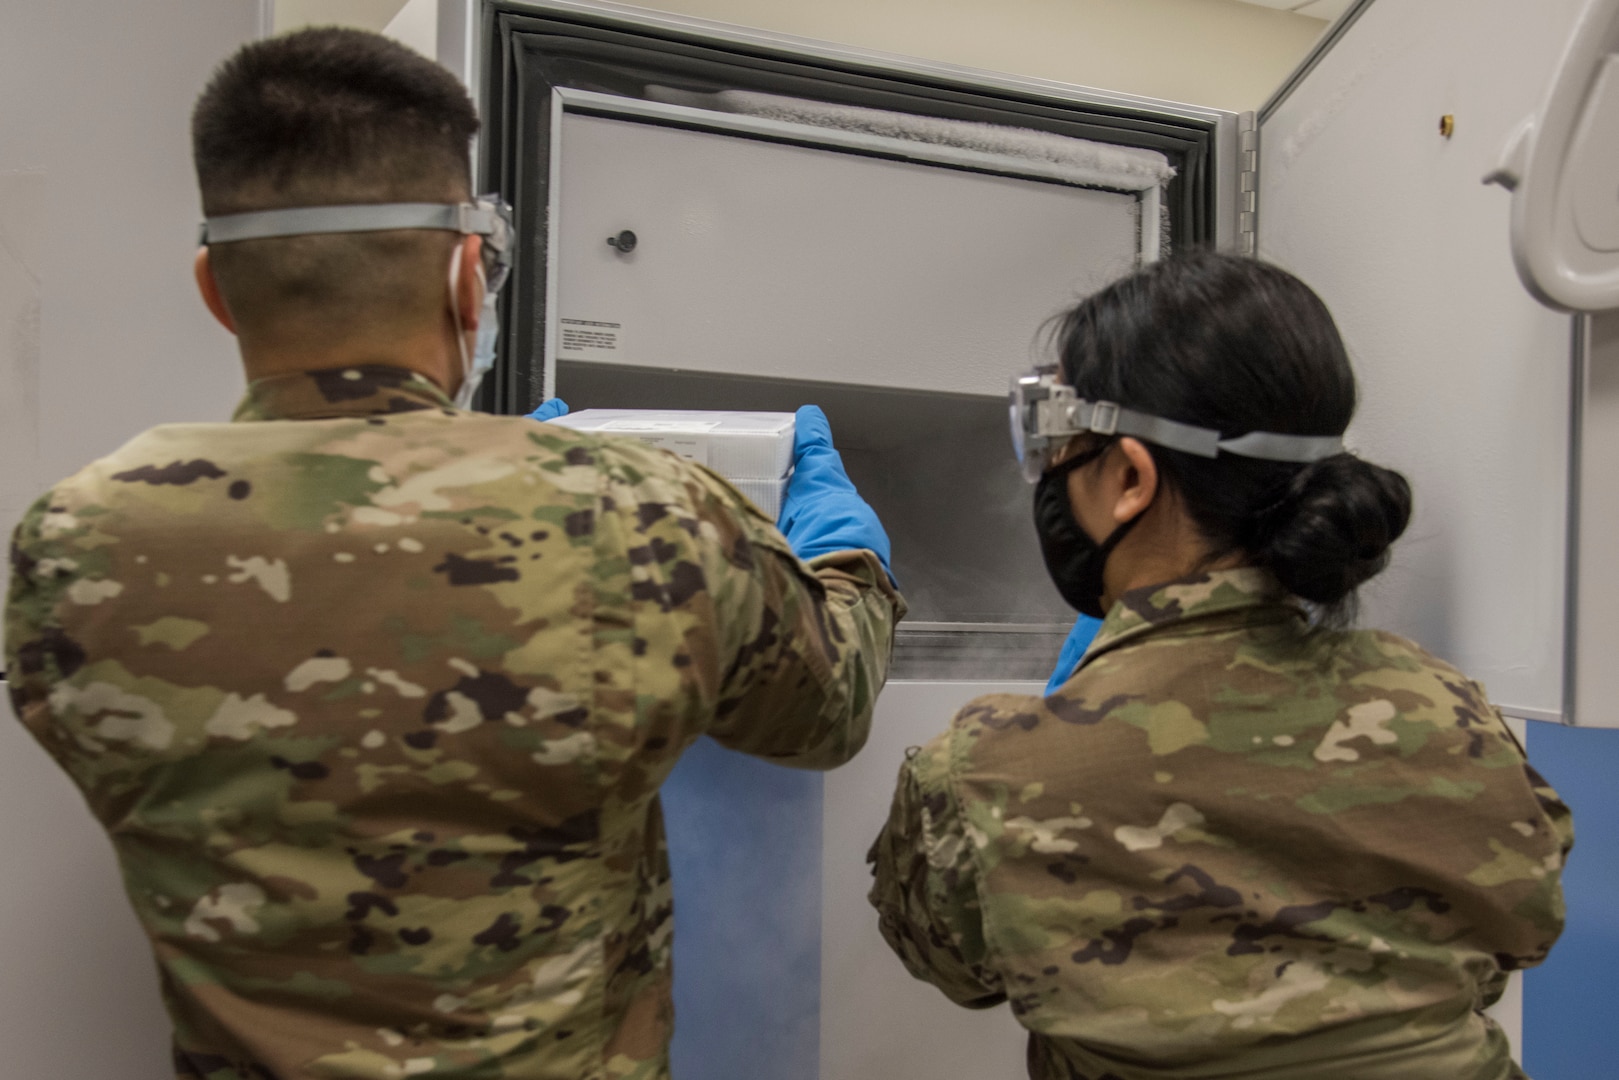 The Department of Defense is implementing a standardized and coordinated strategy for prioritizing, distributing, and administering the COVID-19 vaccine through a phased approach to all Active Duty, Reserve, National Guard, and all mission-essential DoD civilian employees and other personnel.